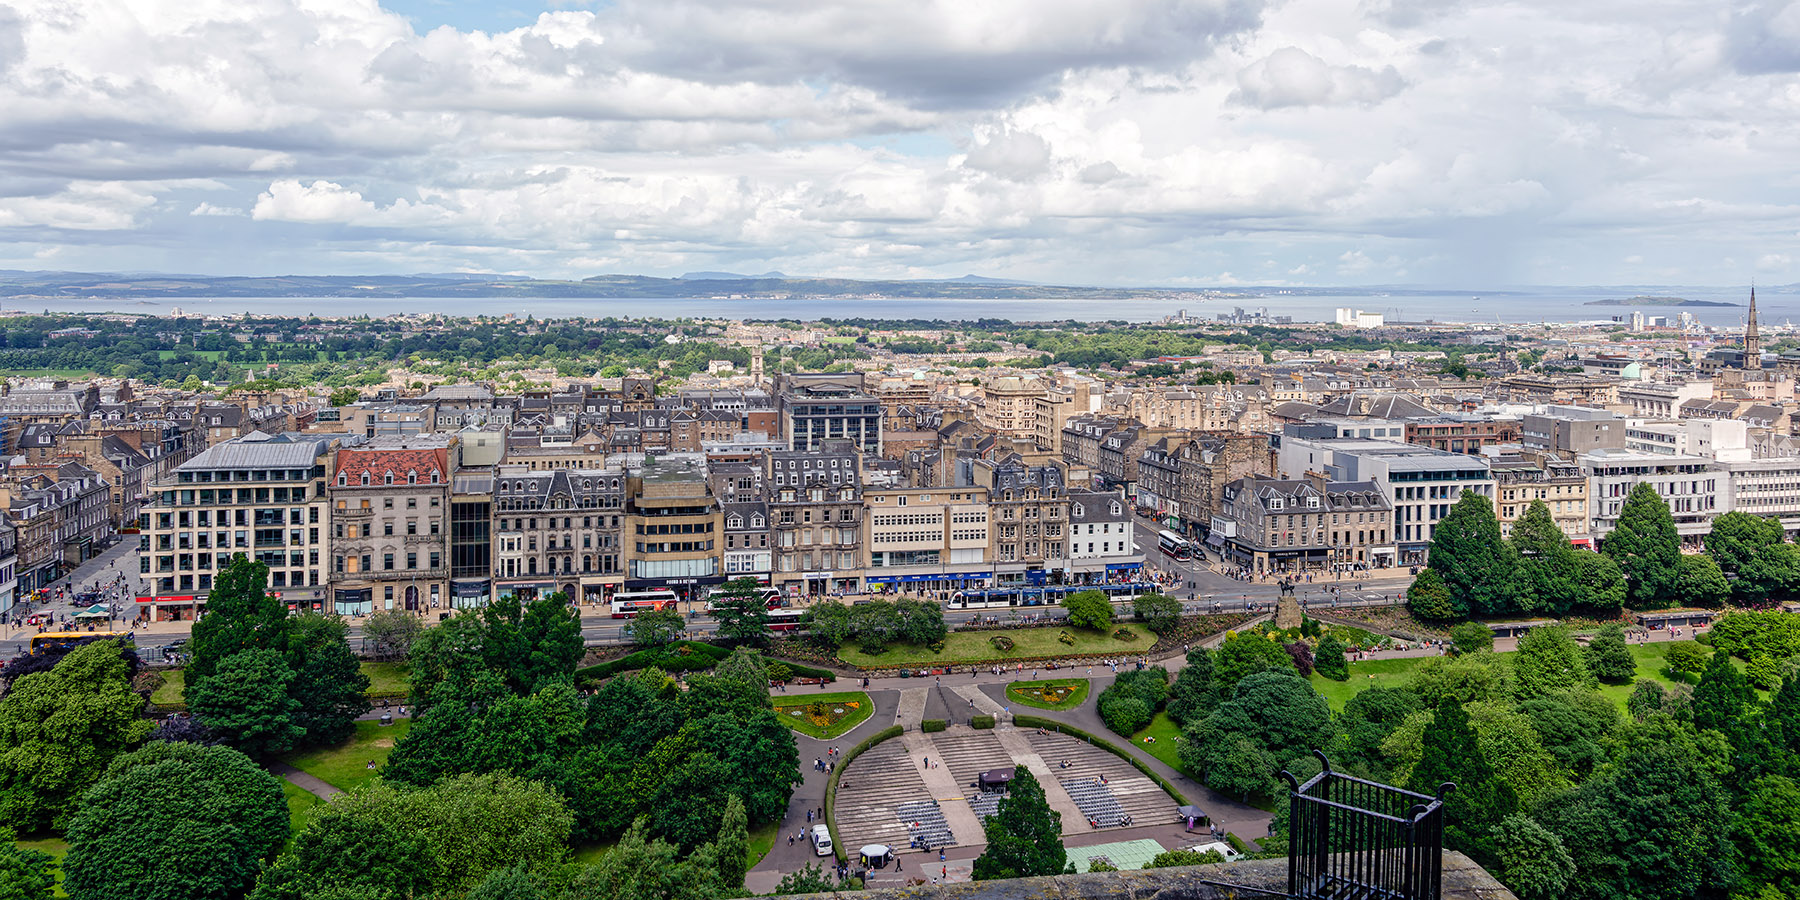 The view from Edinburgh Castle